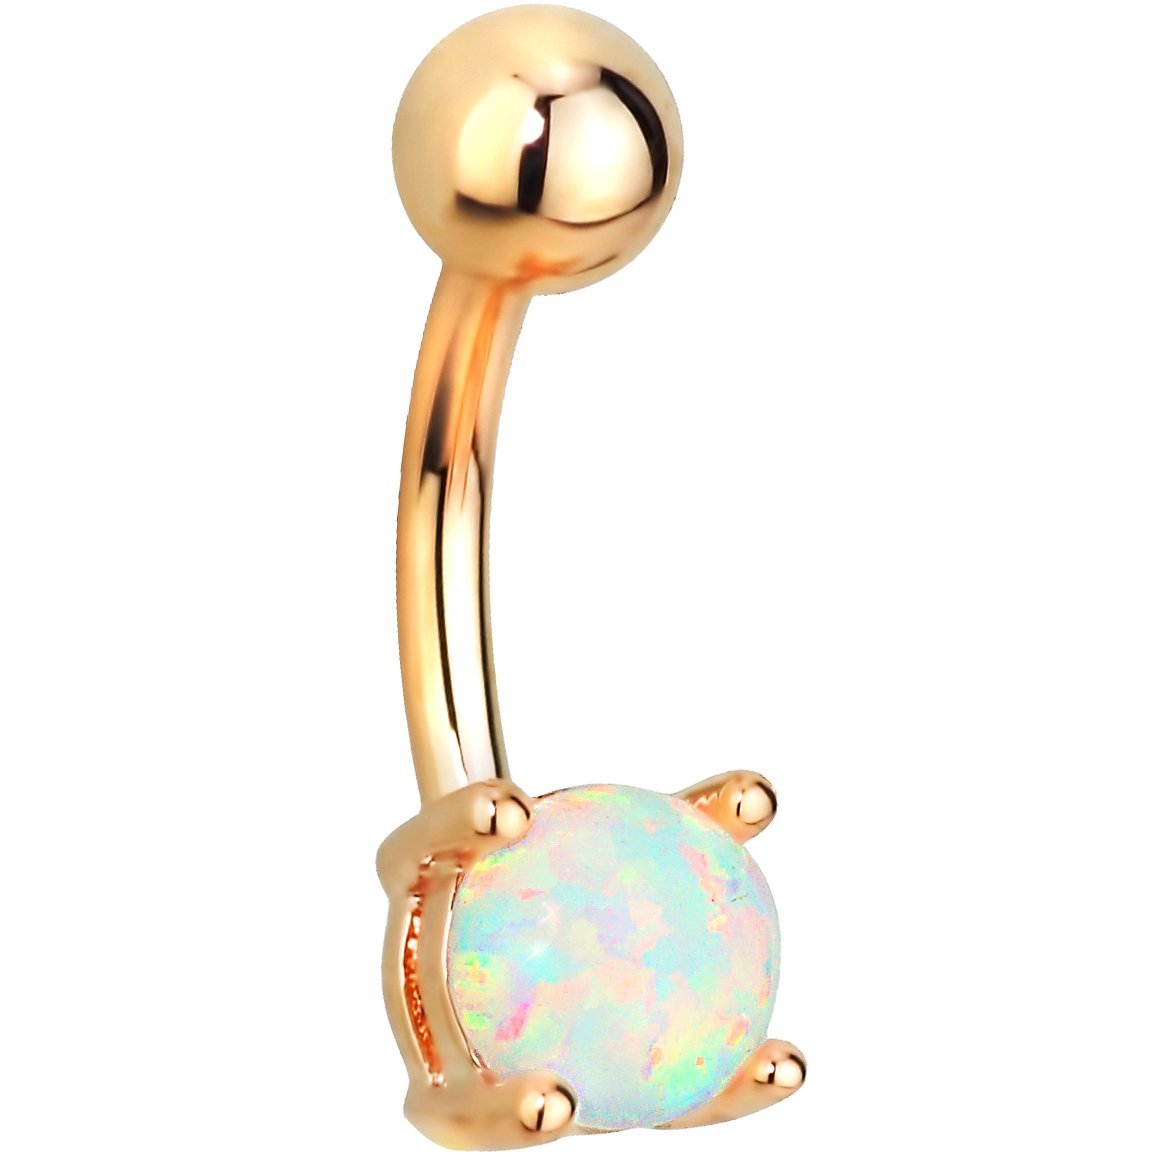 Forbidden Body Jewelry Surgical Steel Rose Gold Plated Simulated White Opal Gemstone Belly Button Ring